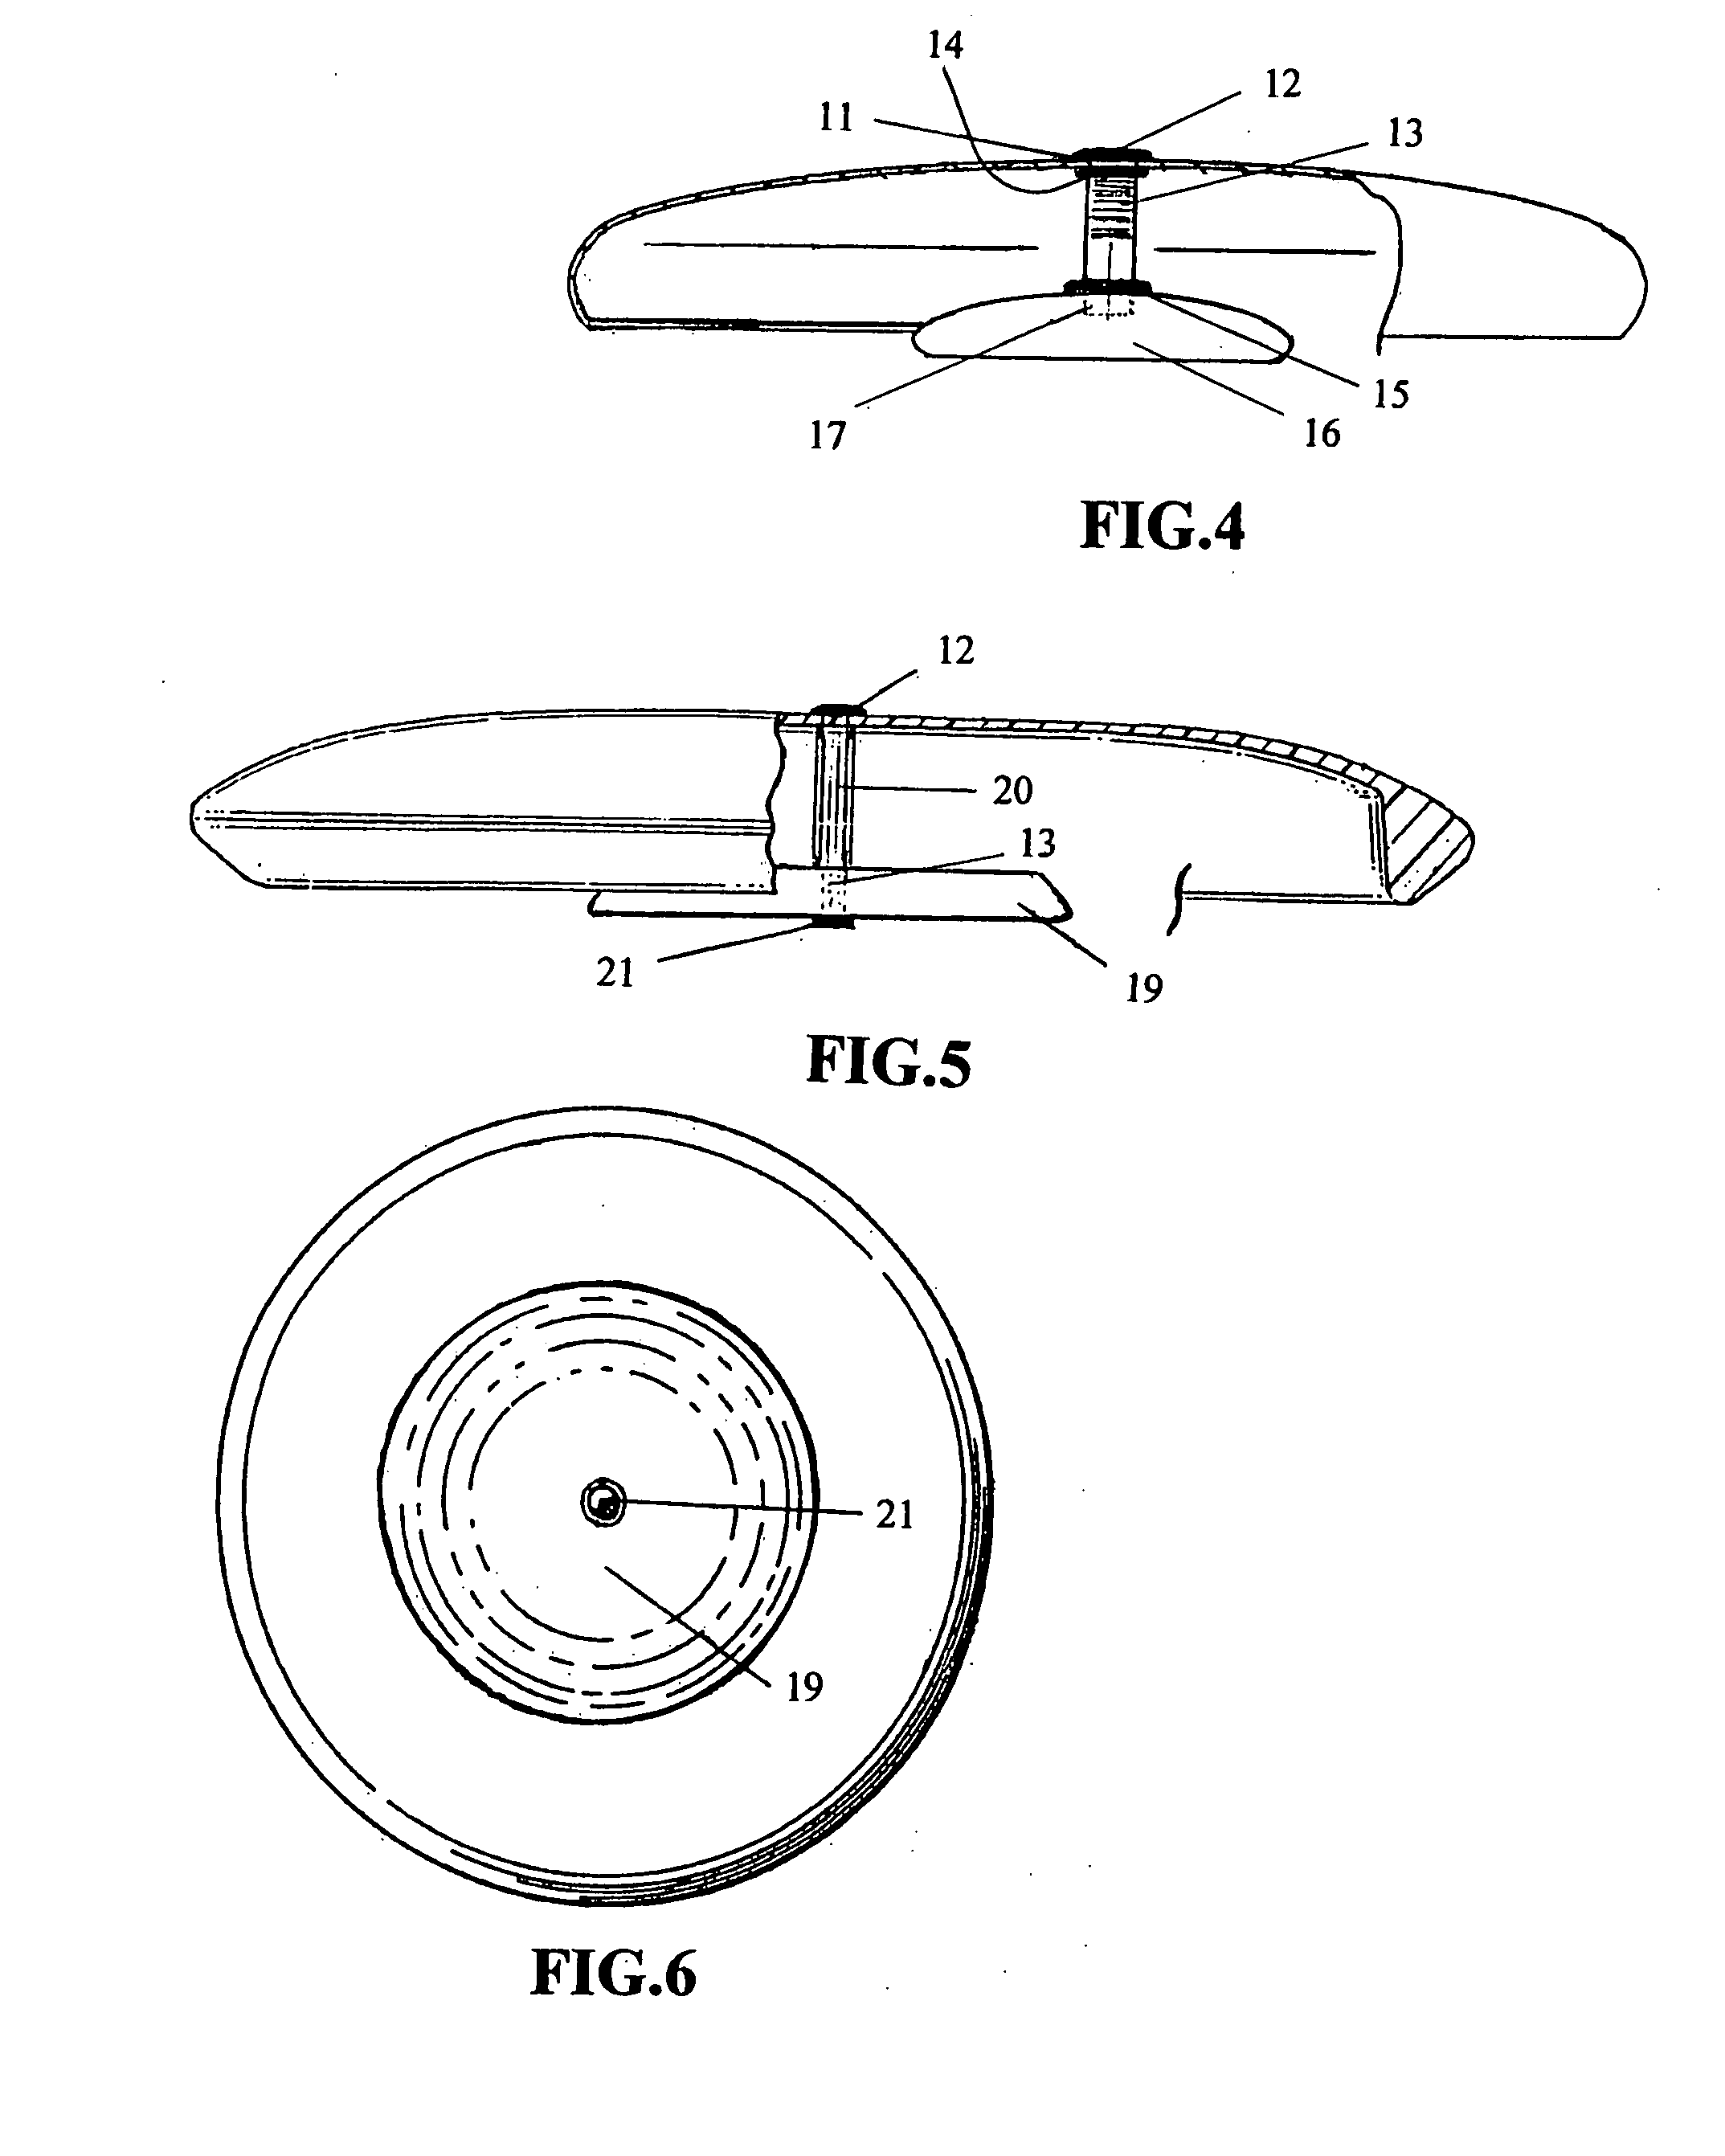 Recreational flying disk apparatus for enhanced flight enabling and traversing land and water surfaces